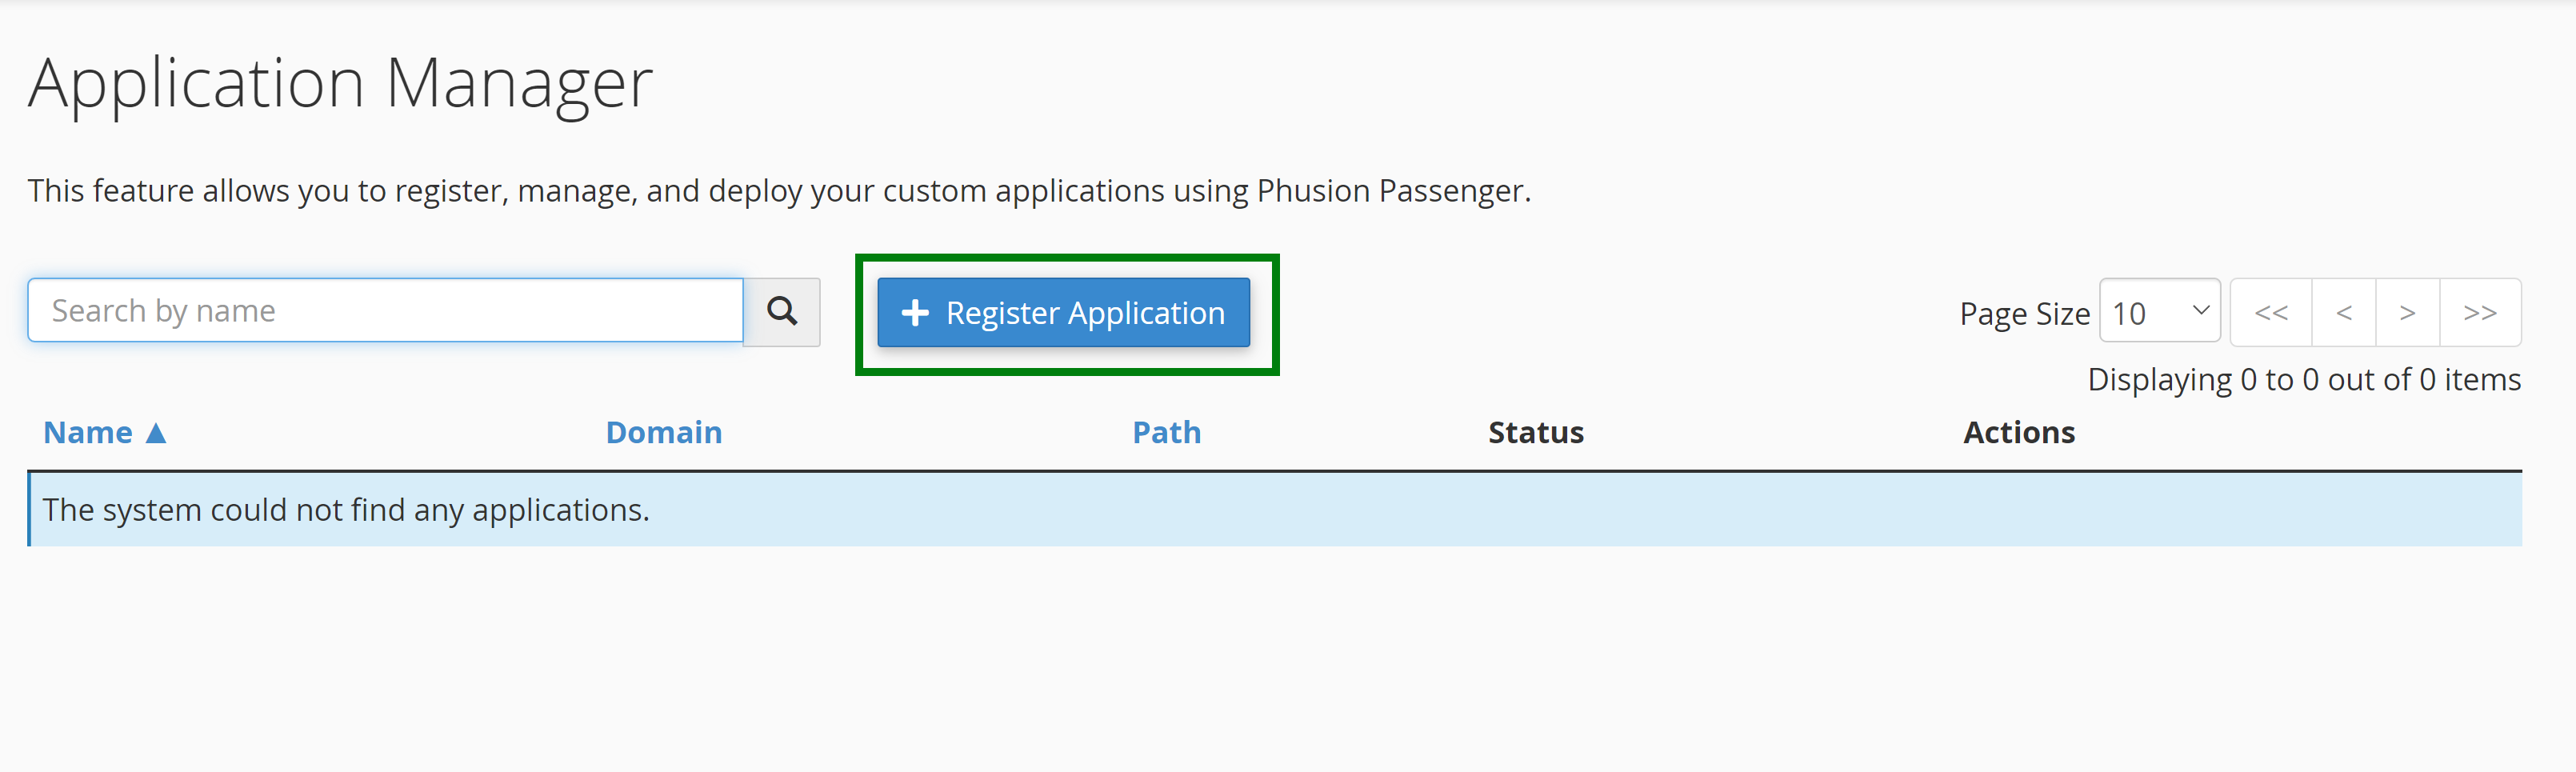 the register application button has a plus sign in front of the R